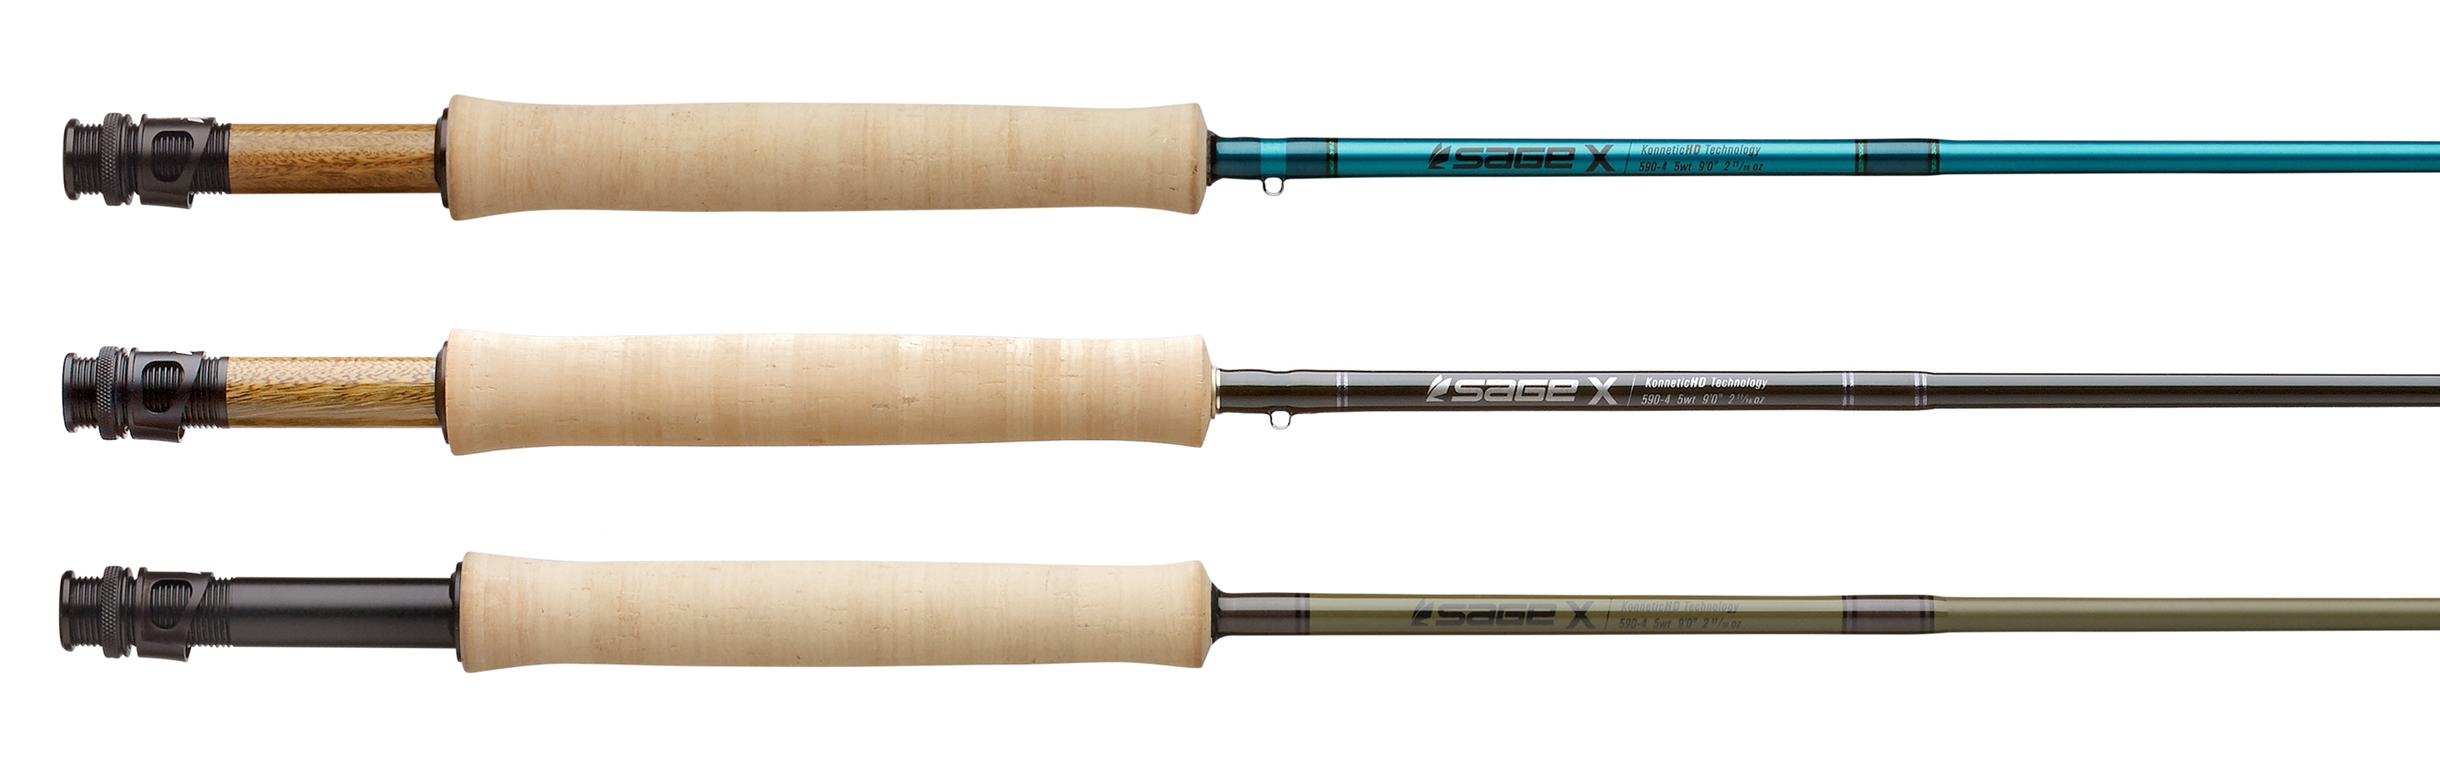 https://thefirstcast.ca/wp-content/uploads/2019/05/New-Special-Edition-Colour-ways-for-The-Sage-X-Rod-Family-D.jpg